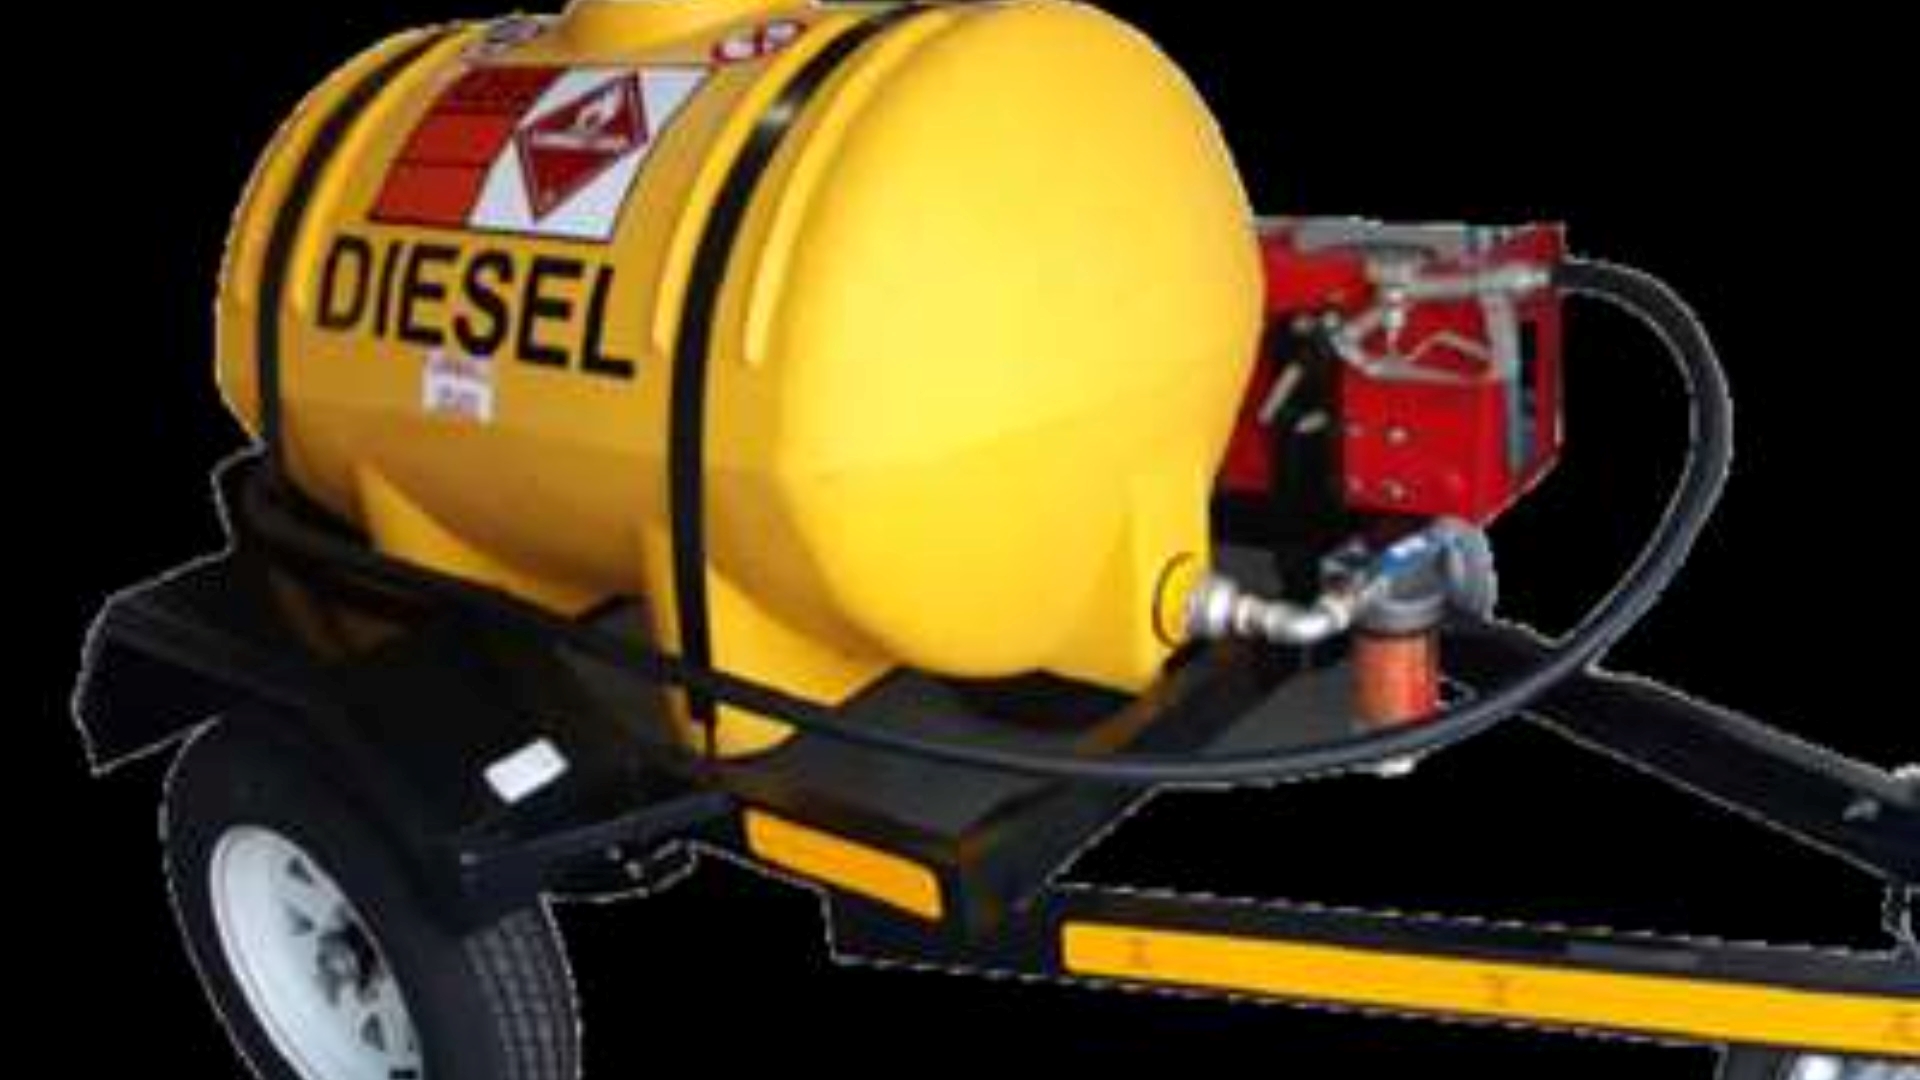 Custom Diesel bowser trailer 500 LITRE PLASTIC DIESEL/WATERBOWSER  76x38mm 2022 for sale by Jikelele Tankers and Trailers   | Truck & Trailer Marketplaces